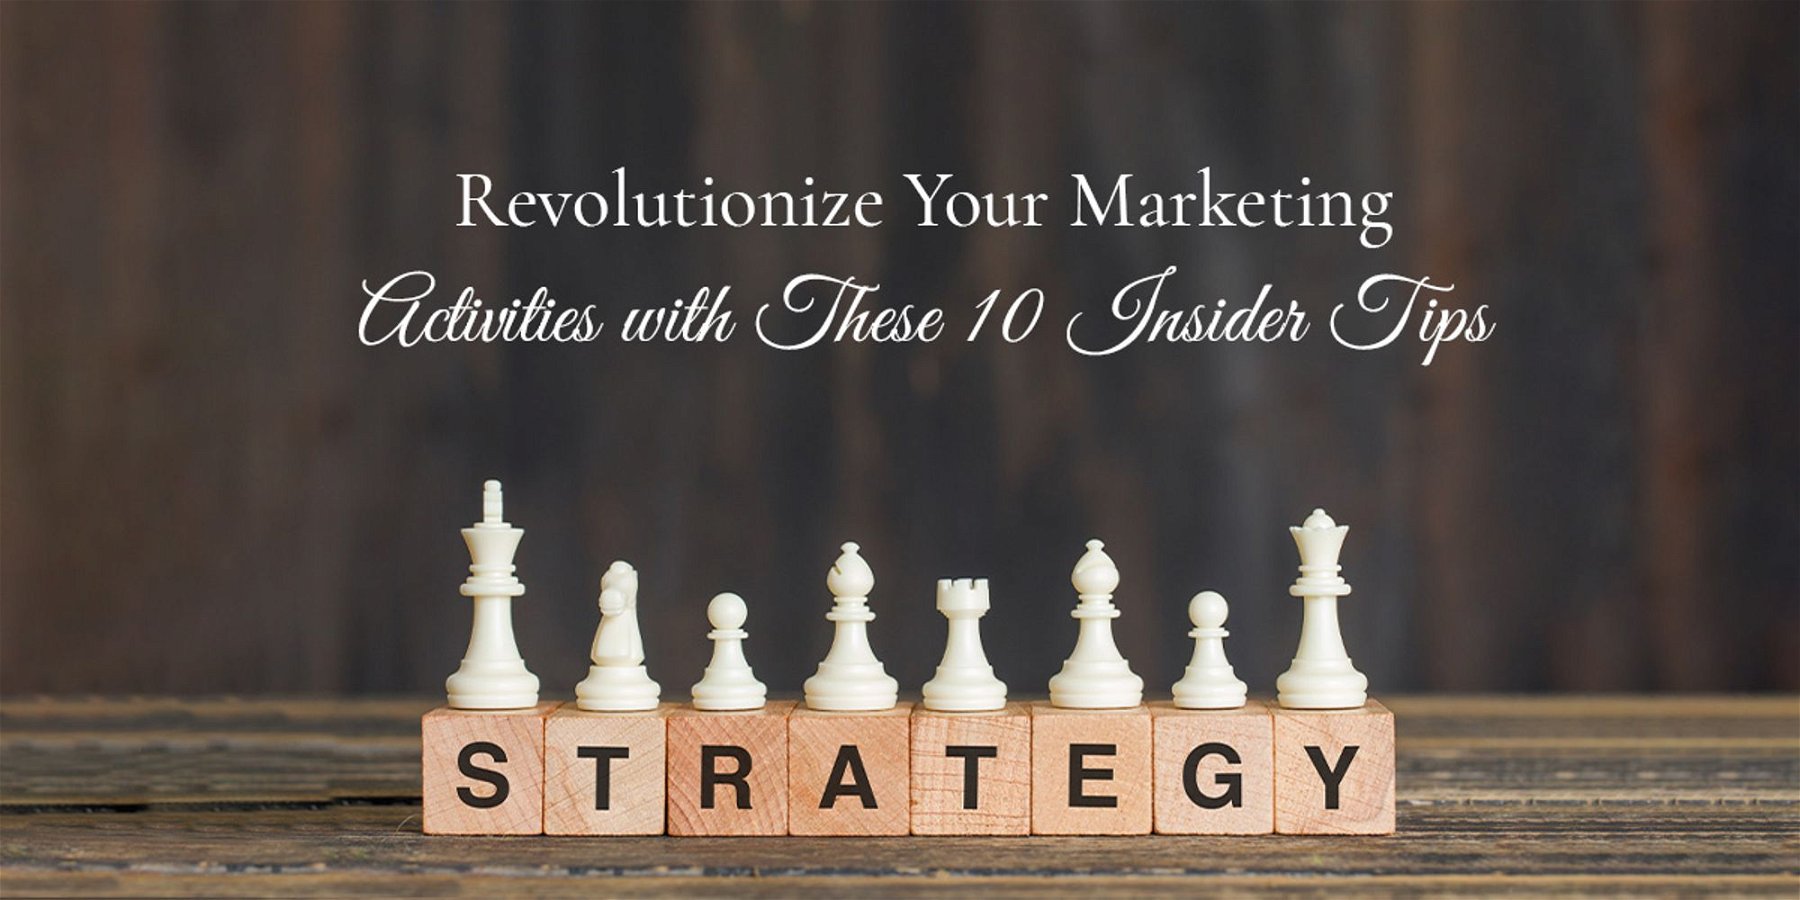 Revolutionize Your Marketing

Cictivities with ese 70 SL ips